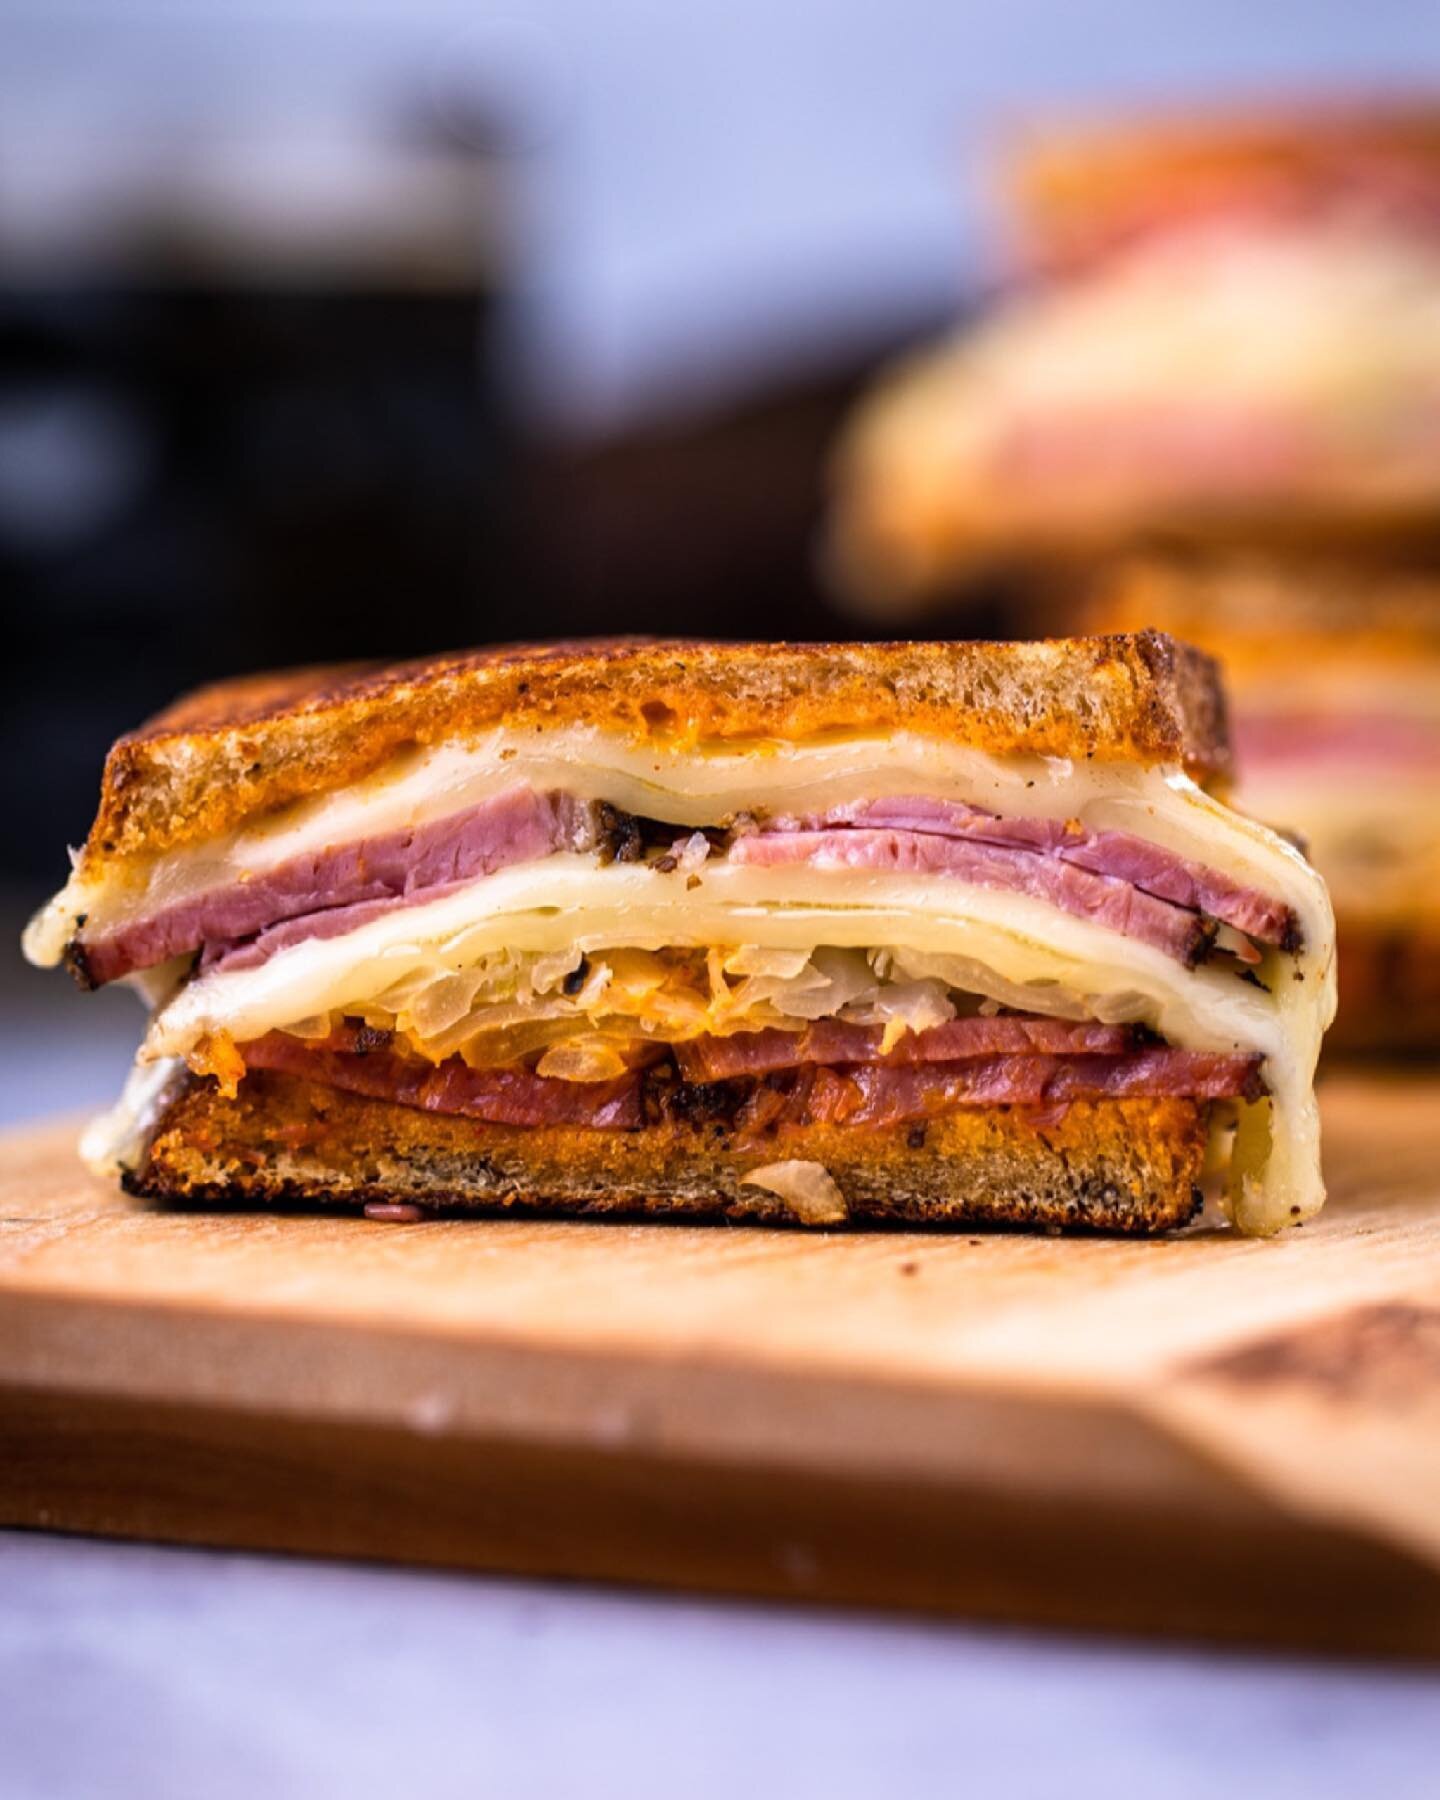 My closest St Patrick&rsquo;s Day meal this week, the Pastrami Reuben. Smoked on Saturday and steamed today. I even cheated with pre-corned beef. Nonetheless, I just had to get it in. What&rsquo;s on your St. Paddy day menu?